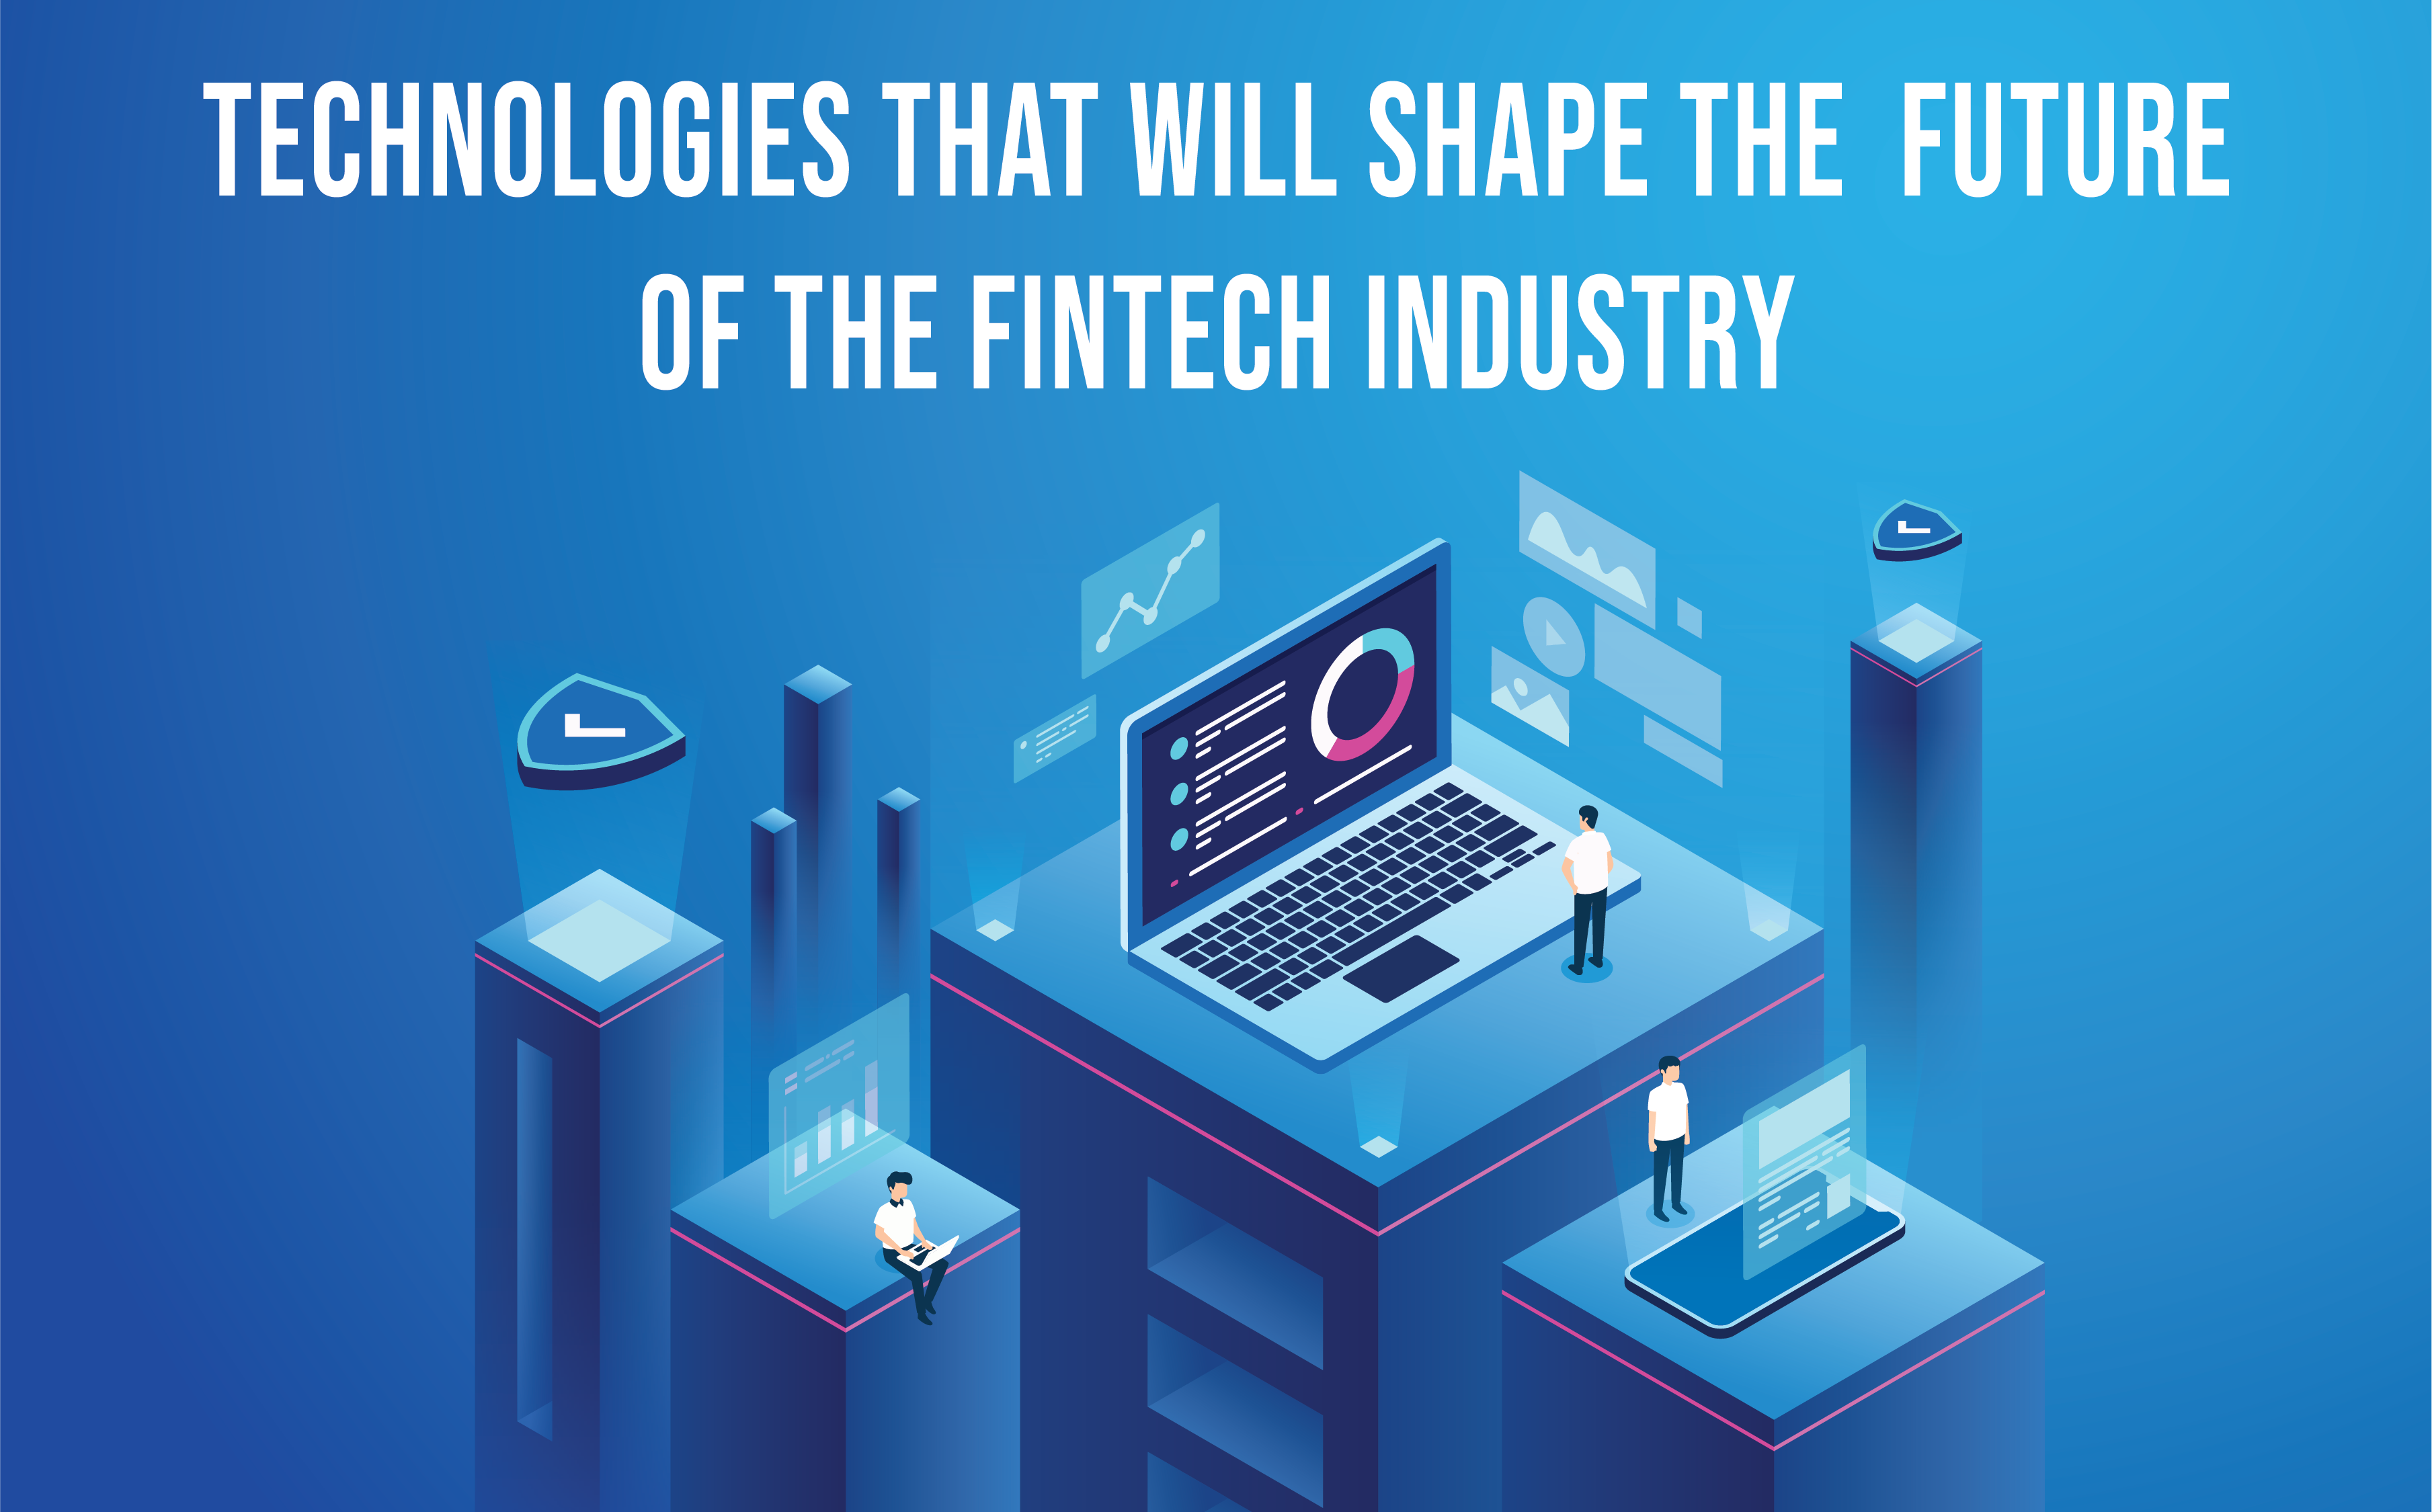 Technologies that will shape the future of the FIntech industry.